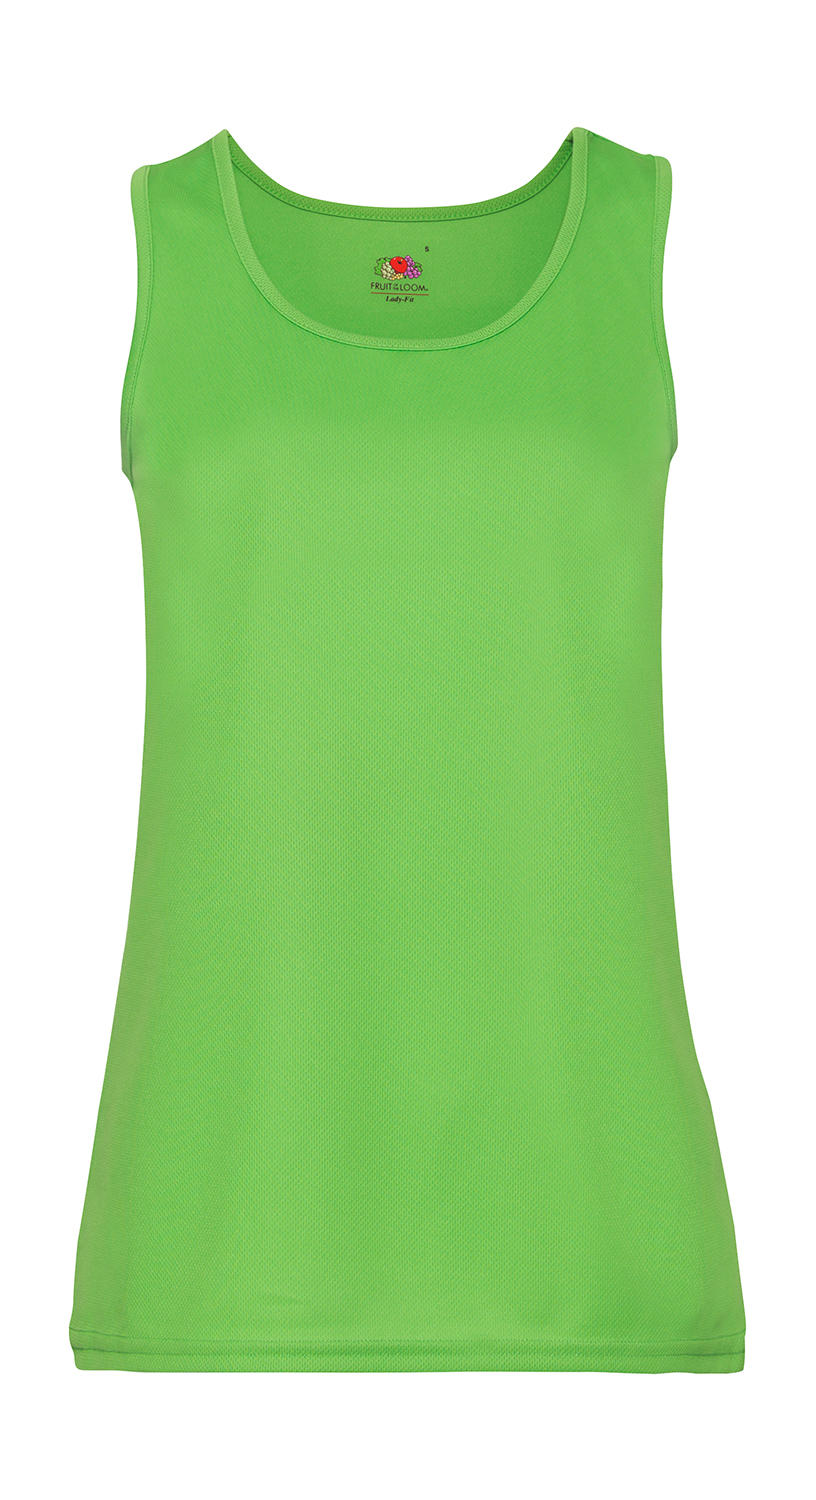  Ladies Performance Vest in Farbe Lime Green